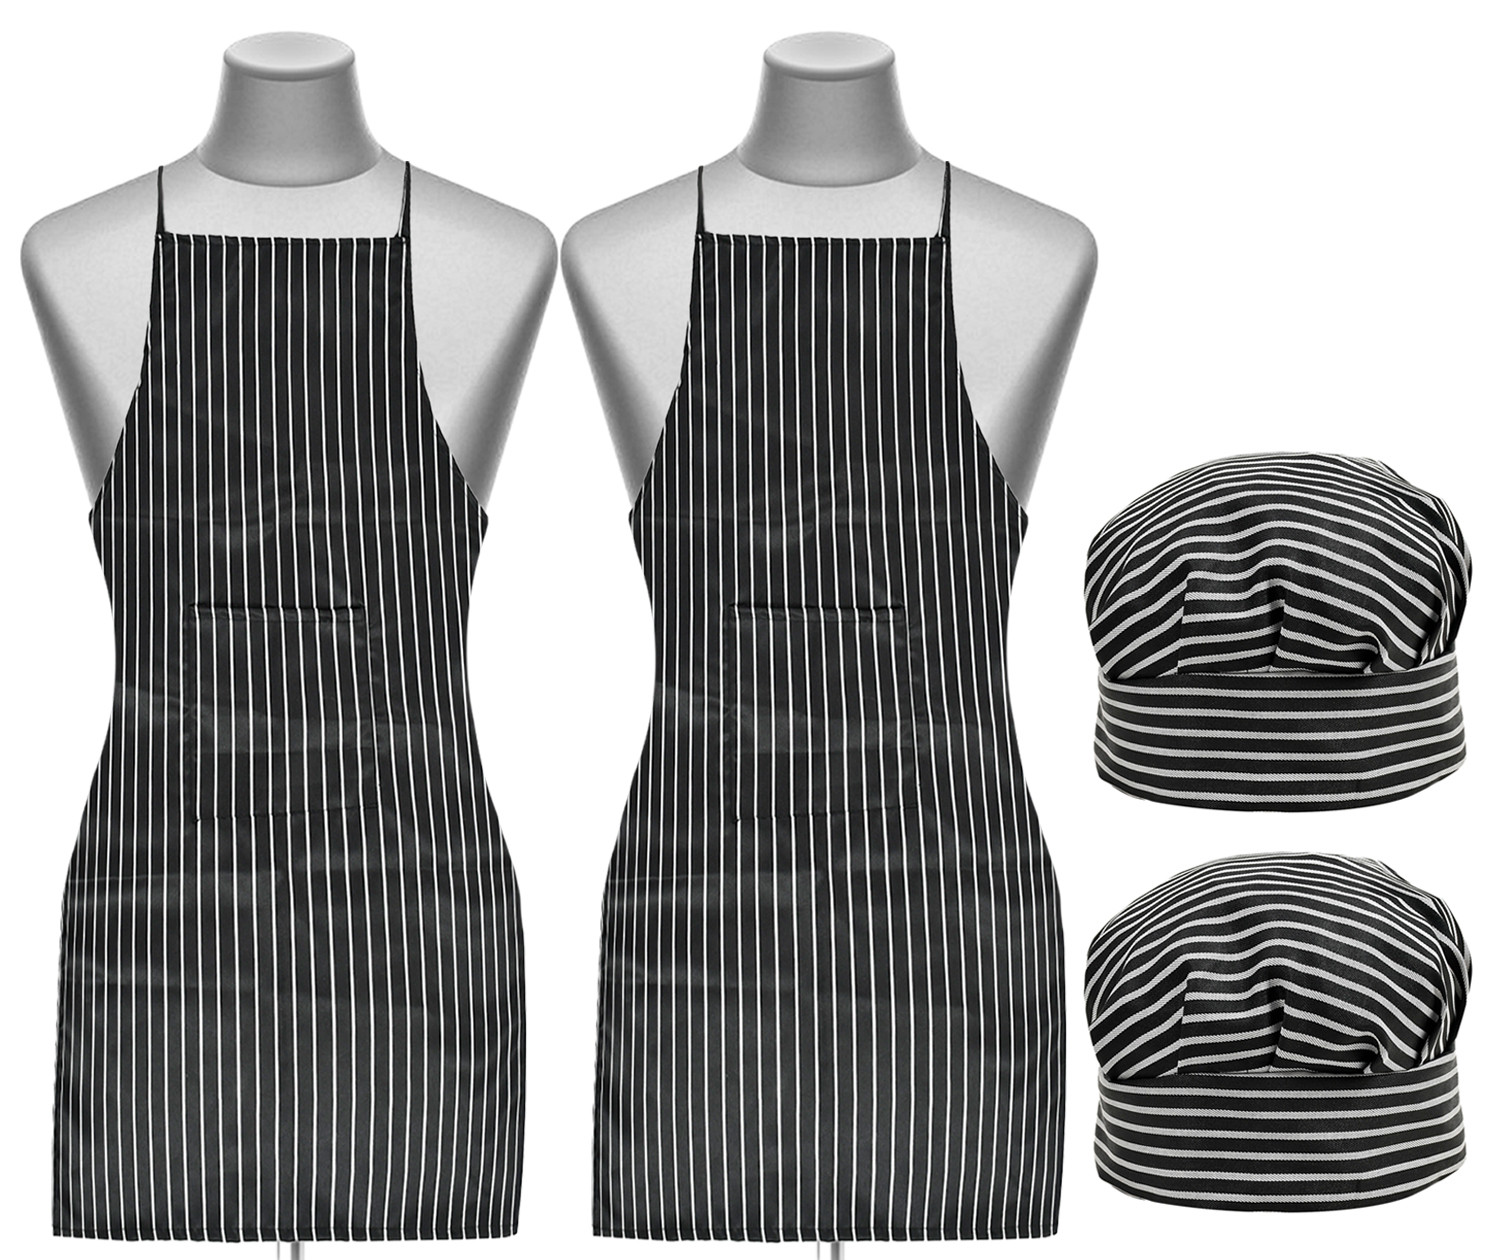 Kuber Industries Linning Printed Apron & Cooking Cap Set For Cooking, Baking, Party Favors, Home Kitchen, Restaurant,(Black)